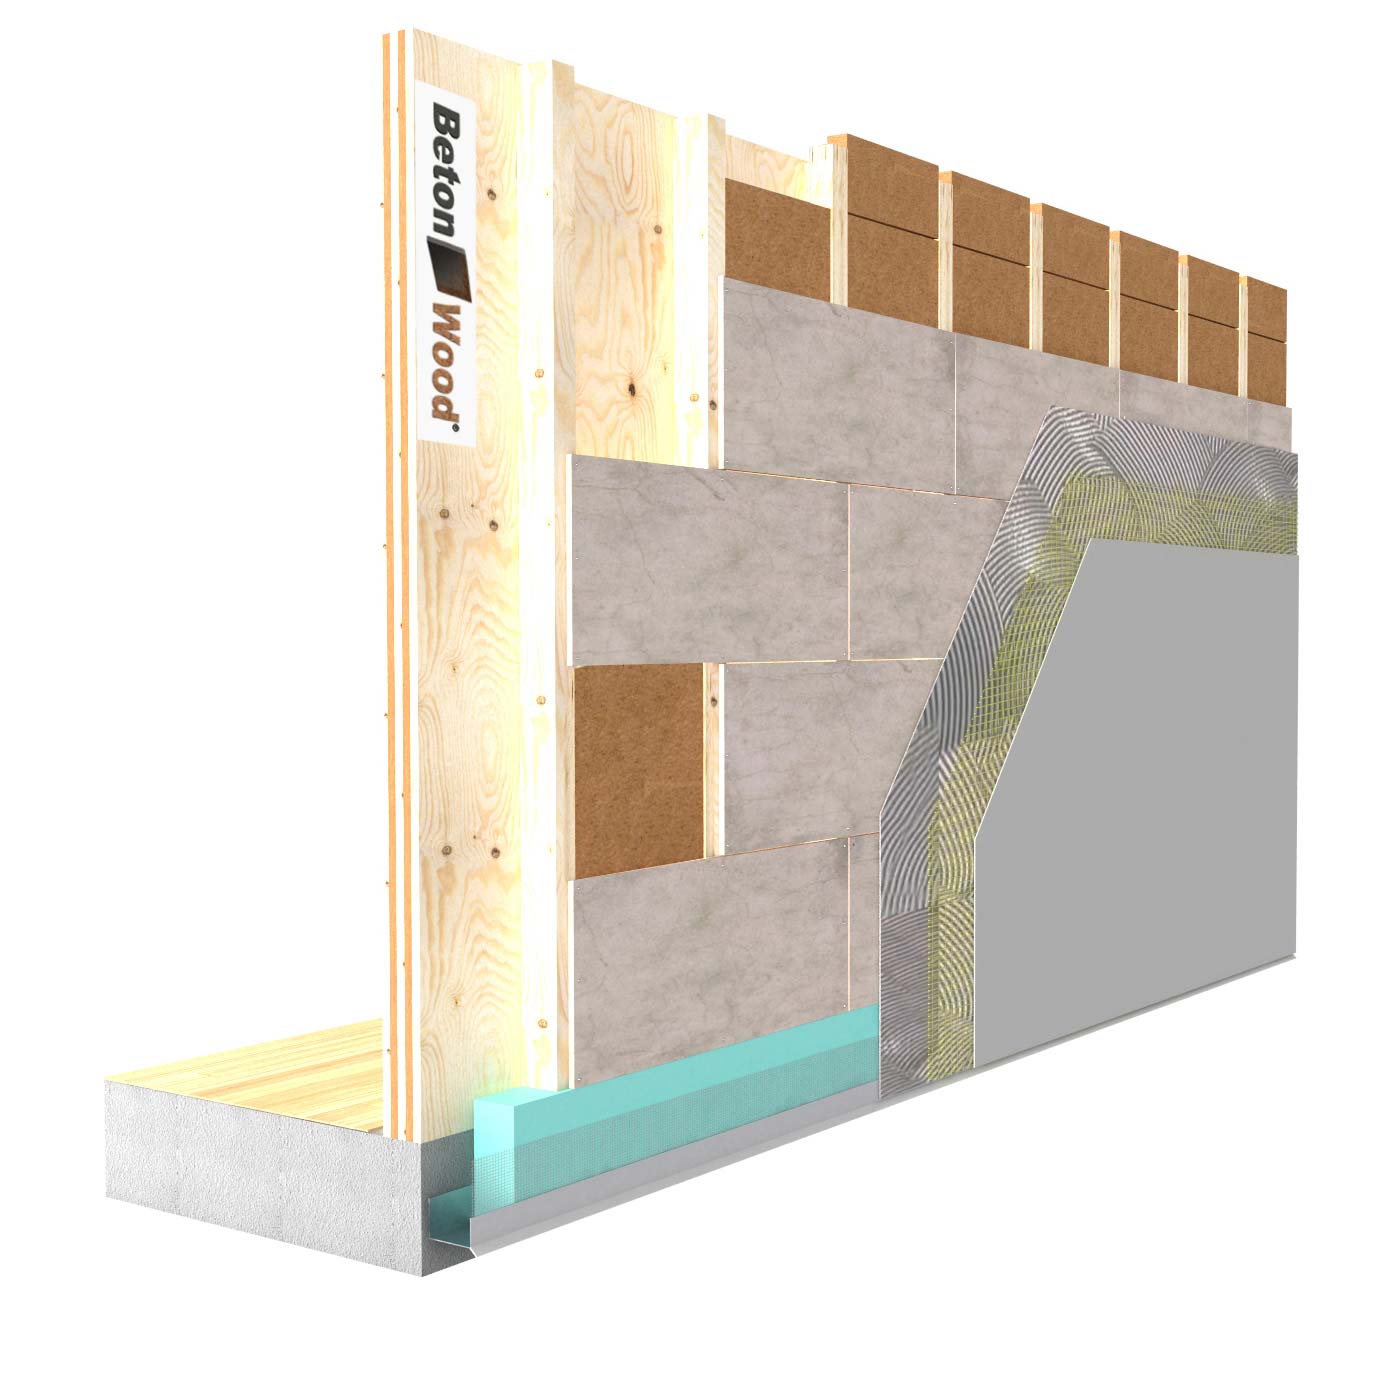 External insulation system with Protect wood fibre board on wooden walls